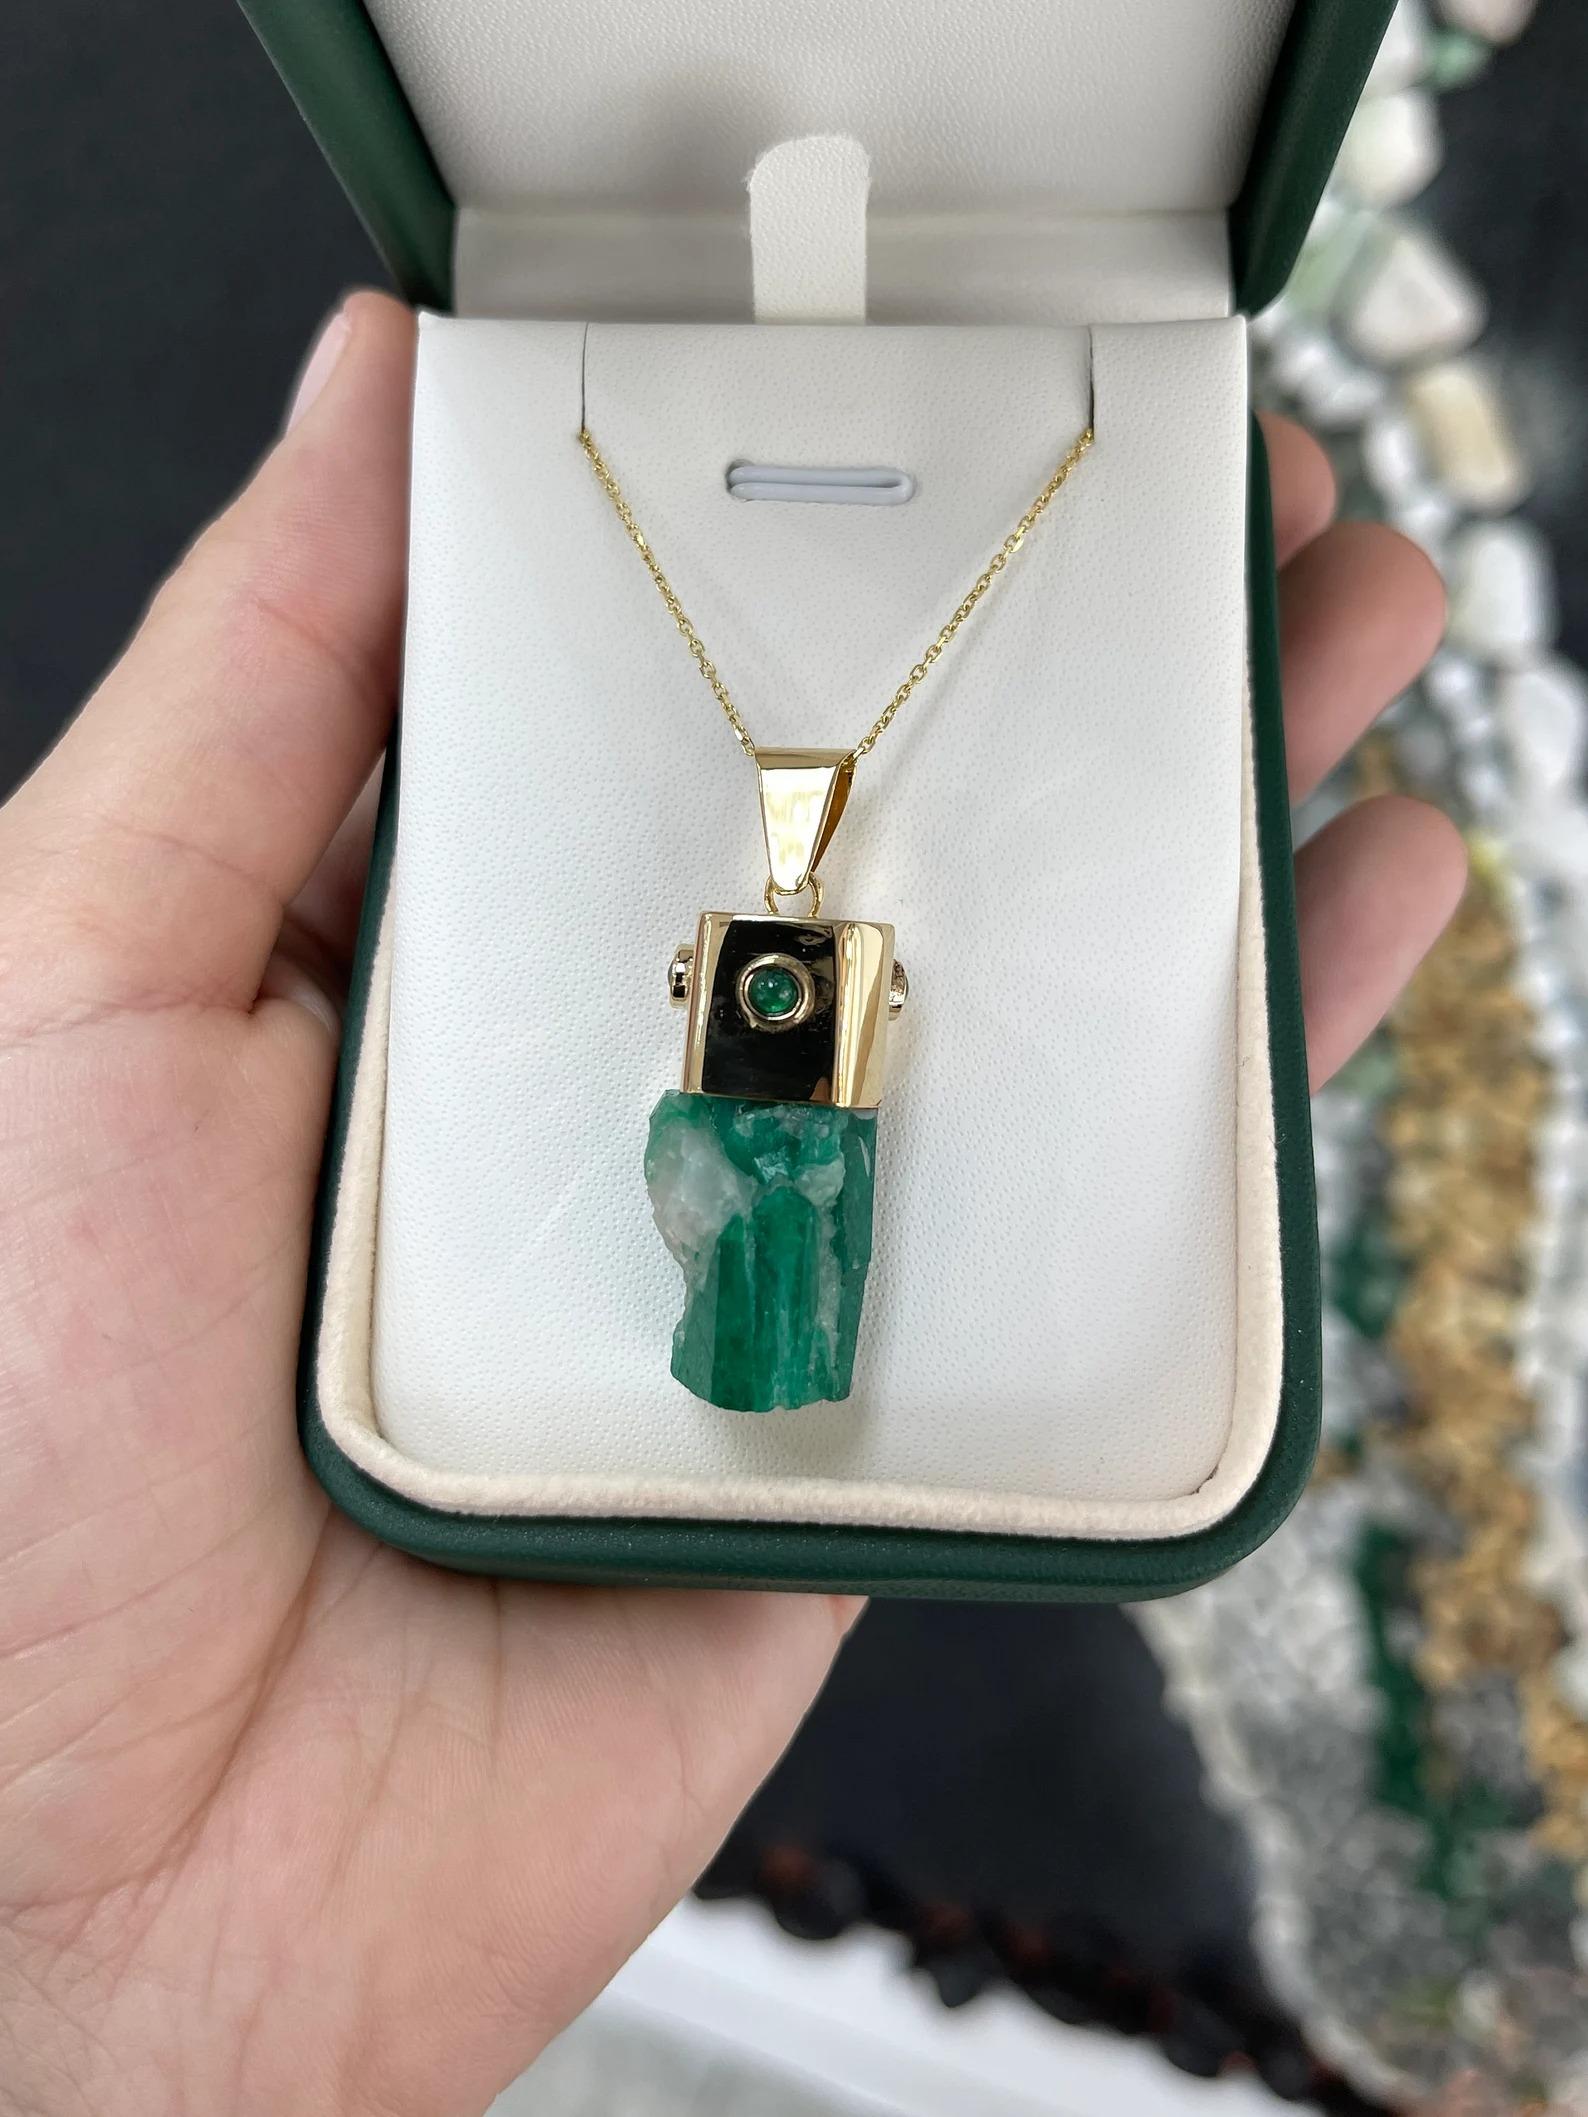 Showcased is a natural, rough emerald crystal pendant. An estimated 48 total carat weight of genuine, rough, Colombian emerald crystal is beautifully set in a hand-made 18K yellow gold cap. The Colombian emerald has a rich, deep green color and has